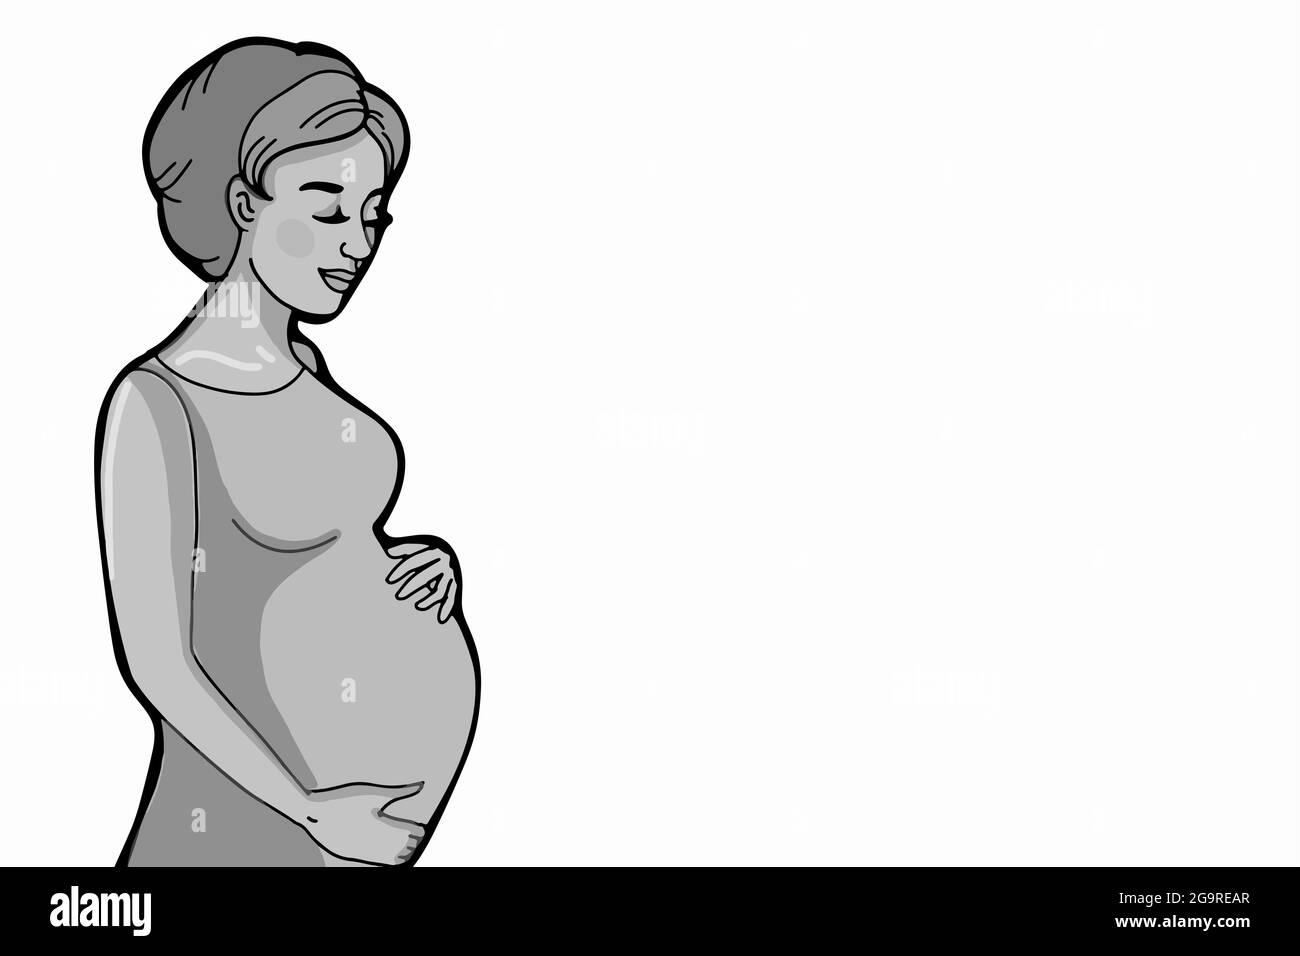 Cartoon ,pregnat woman  half body silhouette, greeting card  and grey colors, textured. Stock Photo